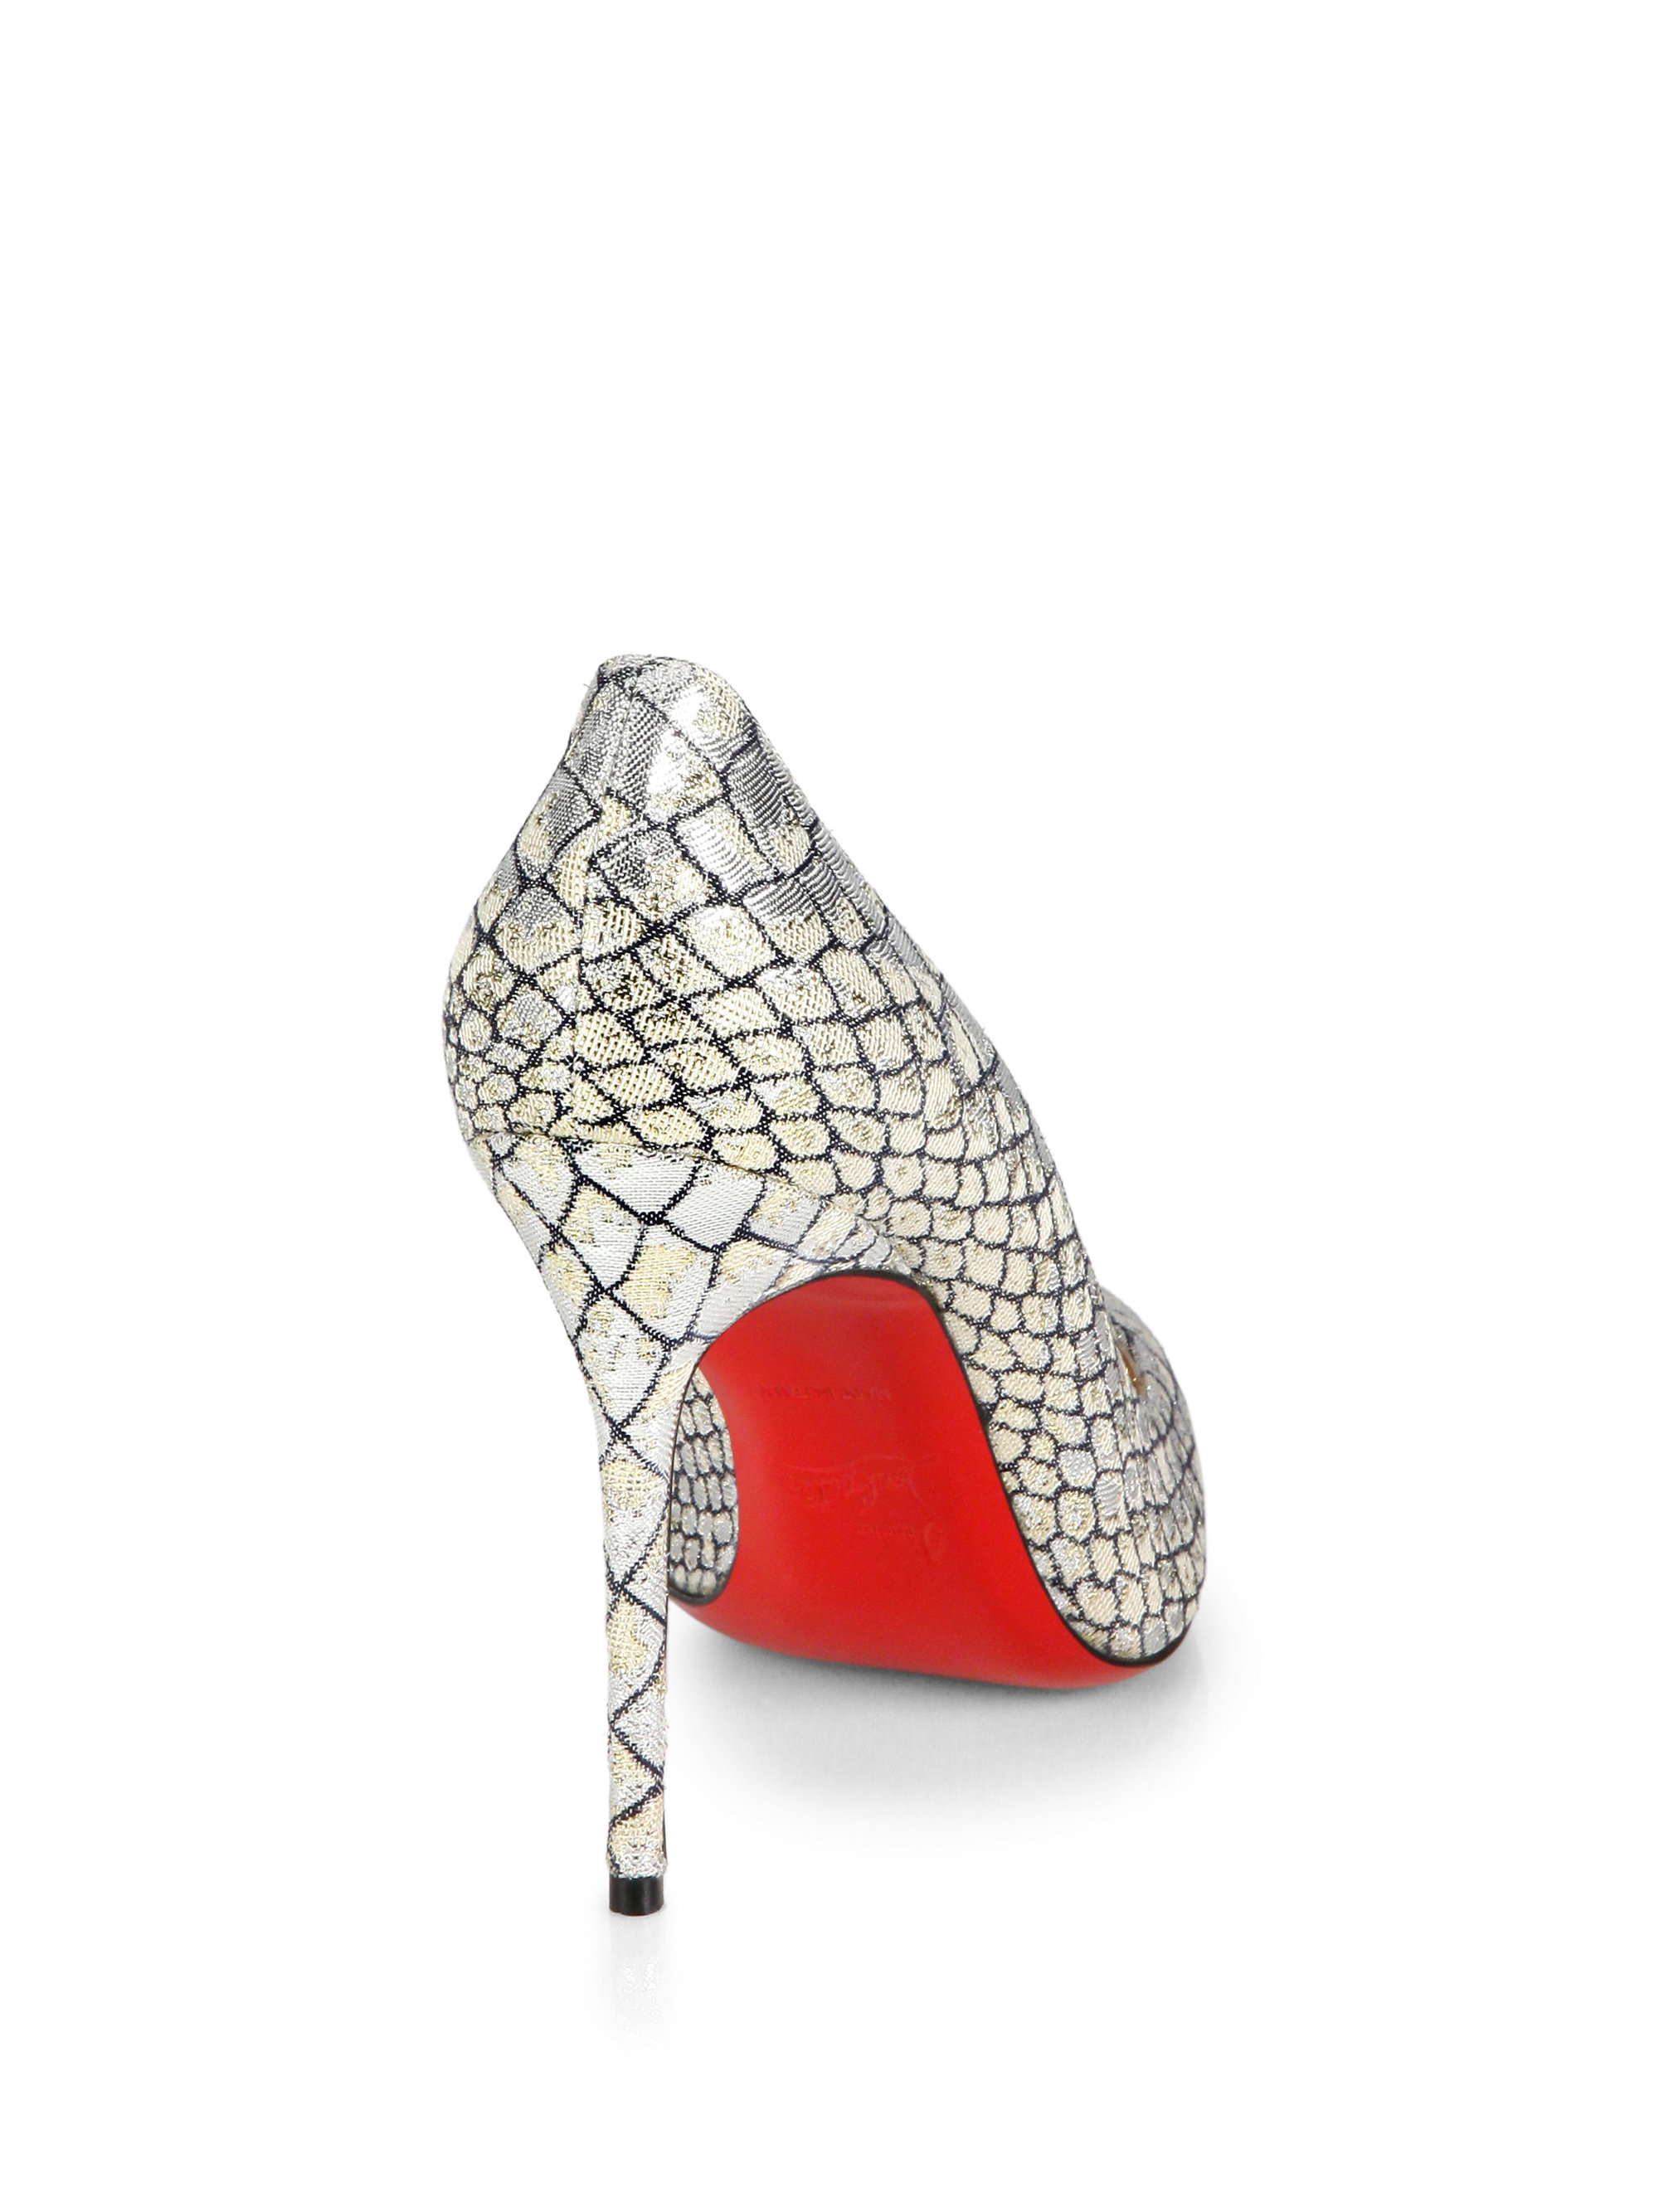 prices christian louboutin south africa | Marianna Mattich